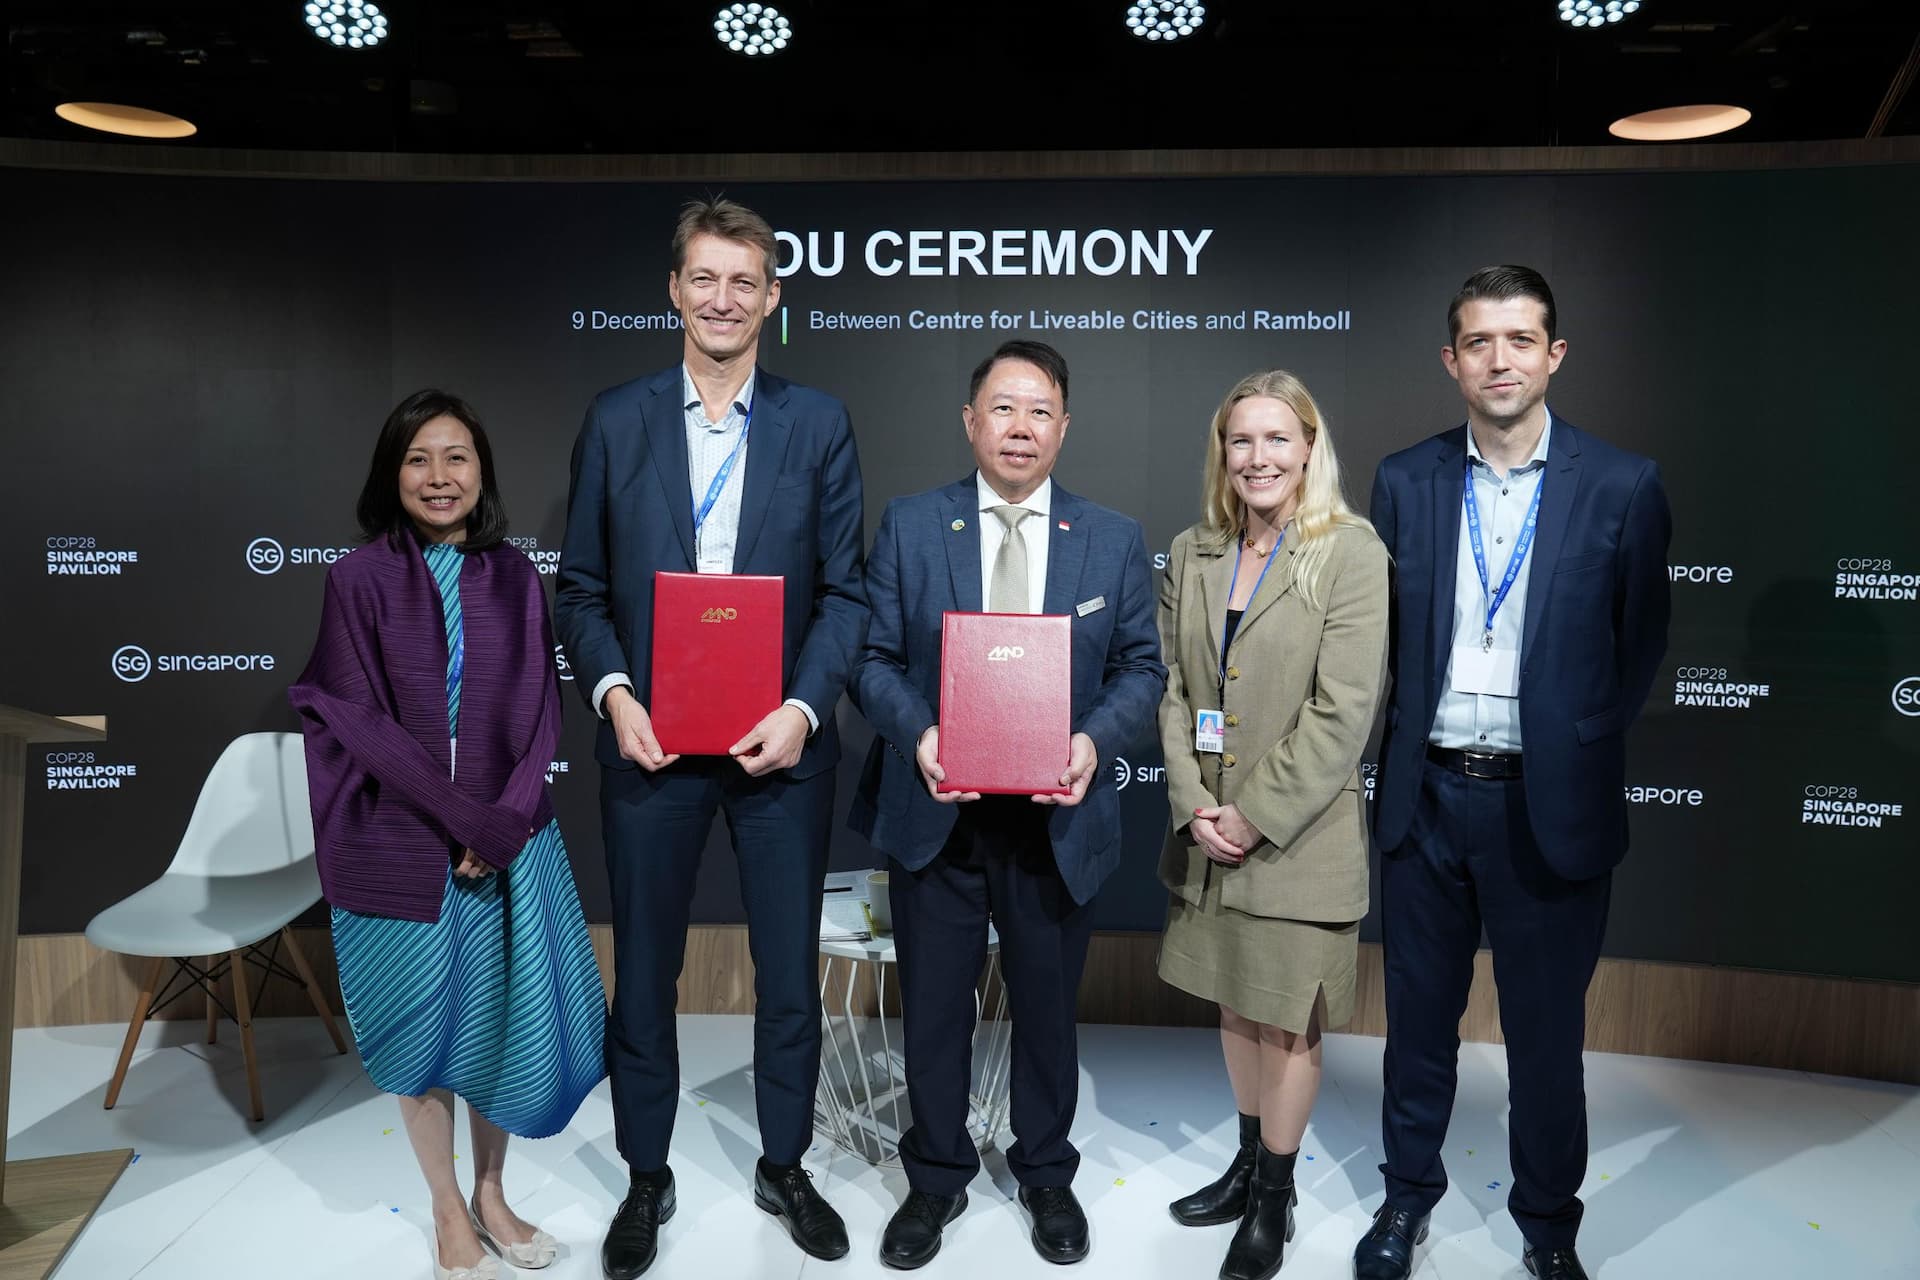 Ramboll and Centre for Liveable Cities seal the MoU at the COP28 Singapore Pavillion.